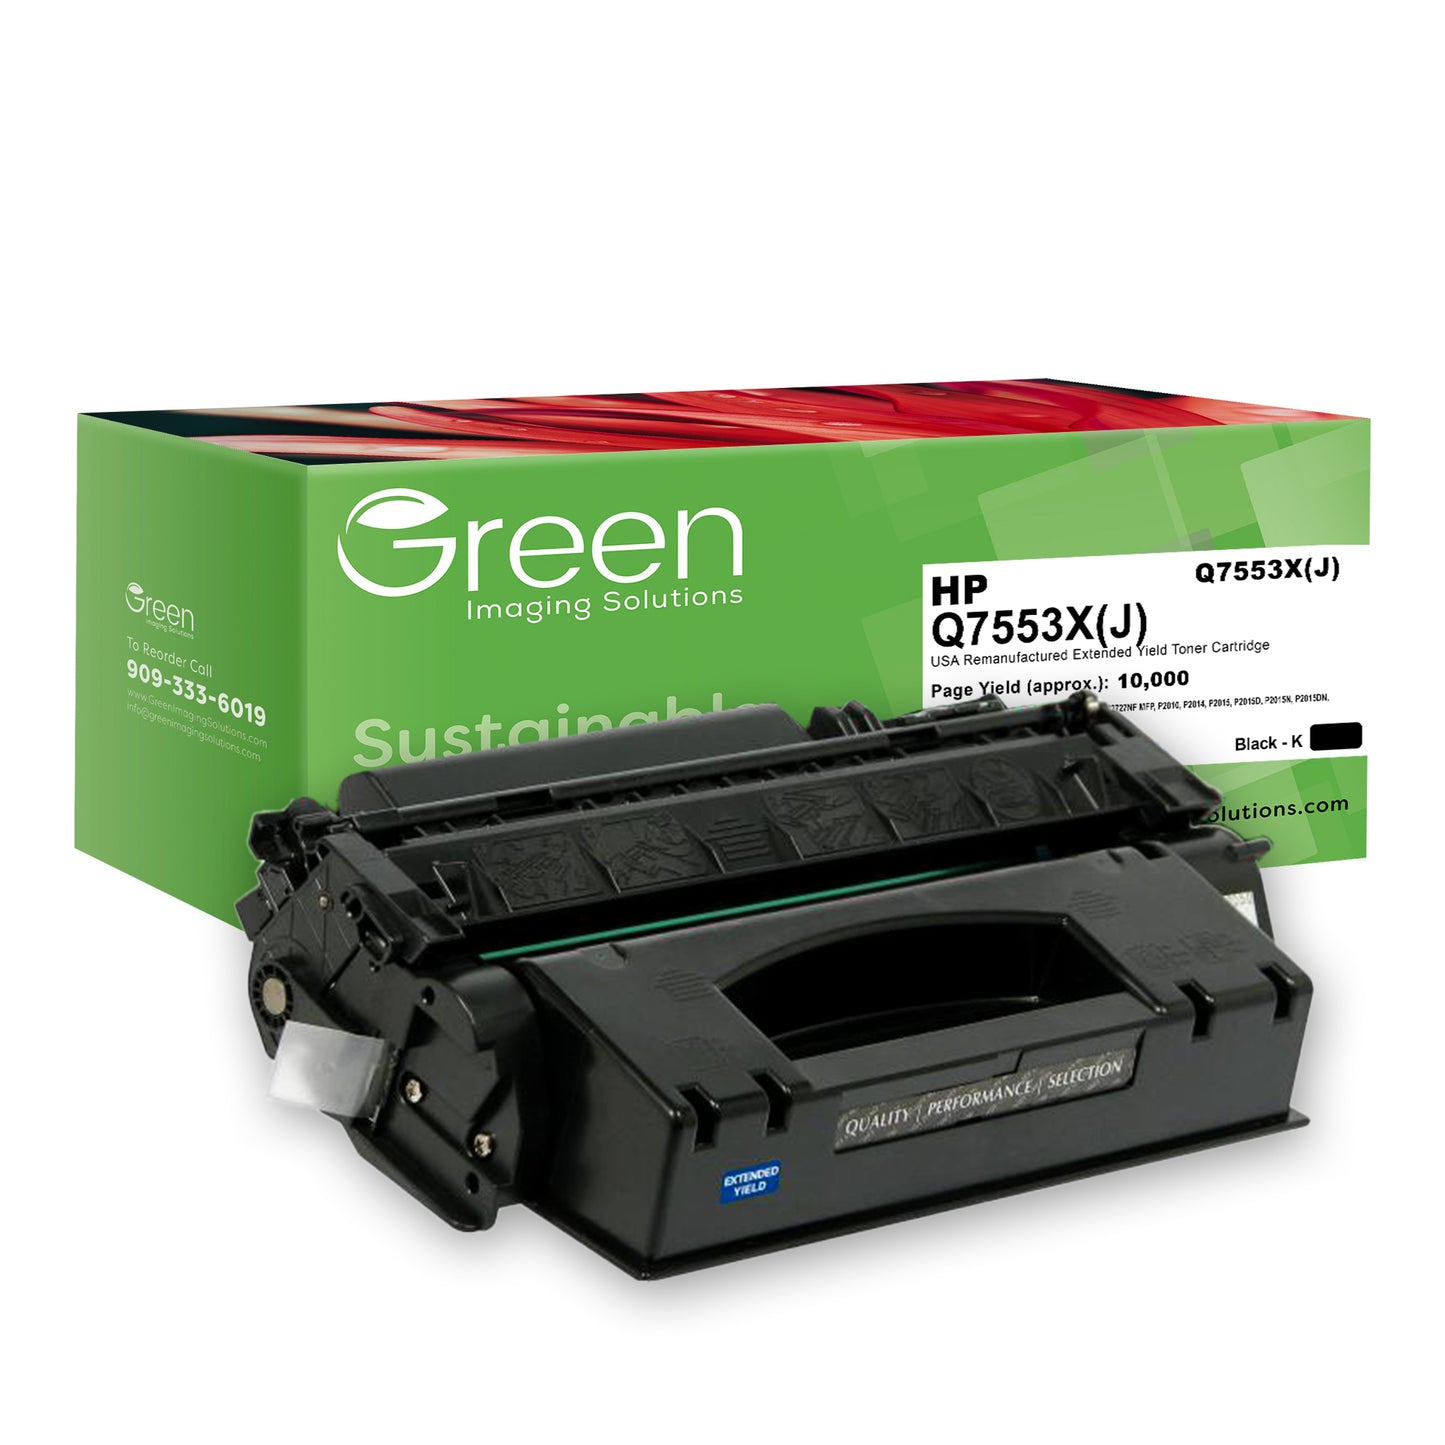 GIS USA Remanufactured Extended Yield Toner Cartridge for HP Q7553X